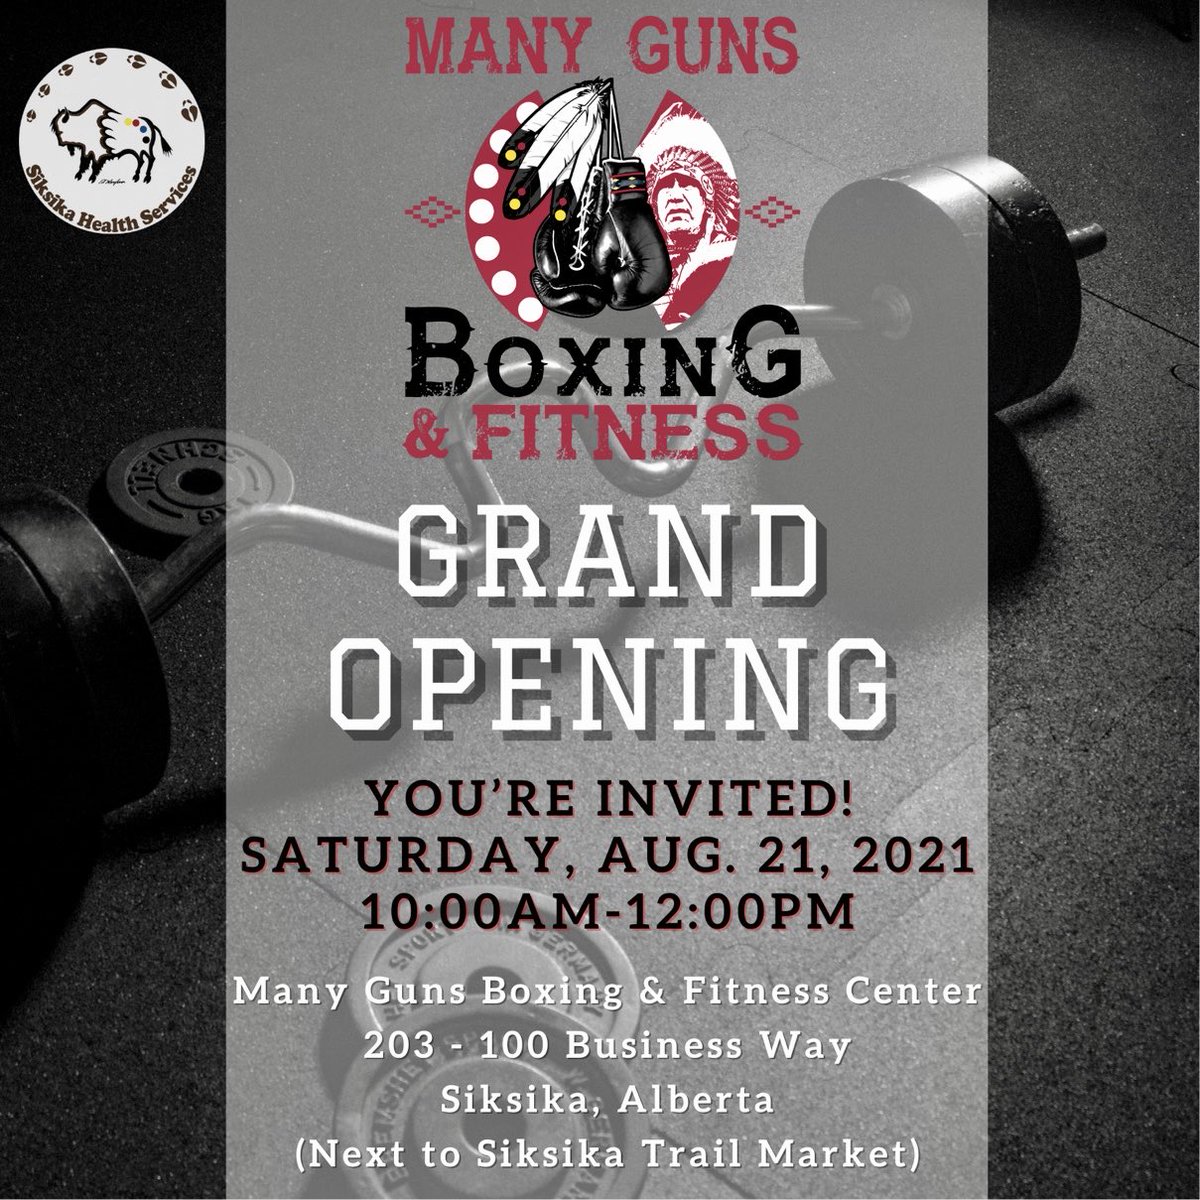 Please come out and join us for our Grand Opening. #SiksikaStrong #SN7 #ManyGunsBoxing #MovementMedicine #MentalHealth #CommunityWellness